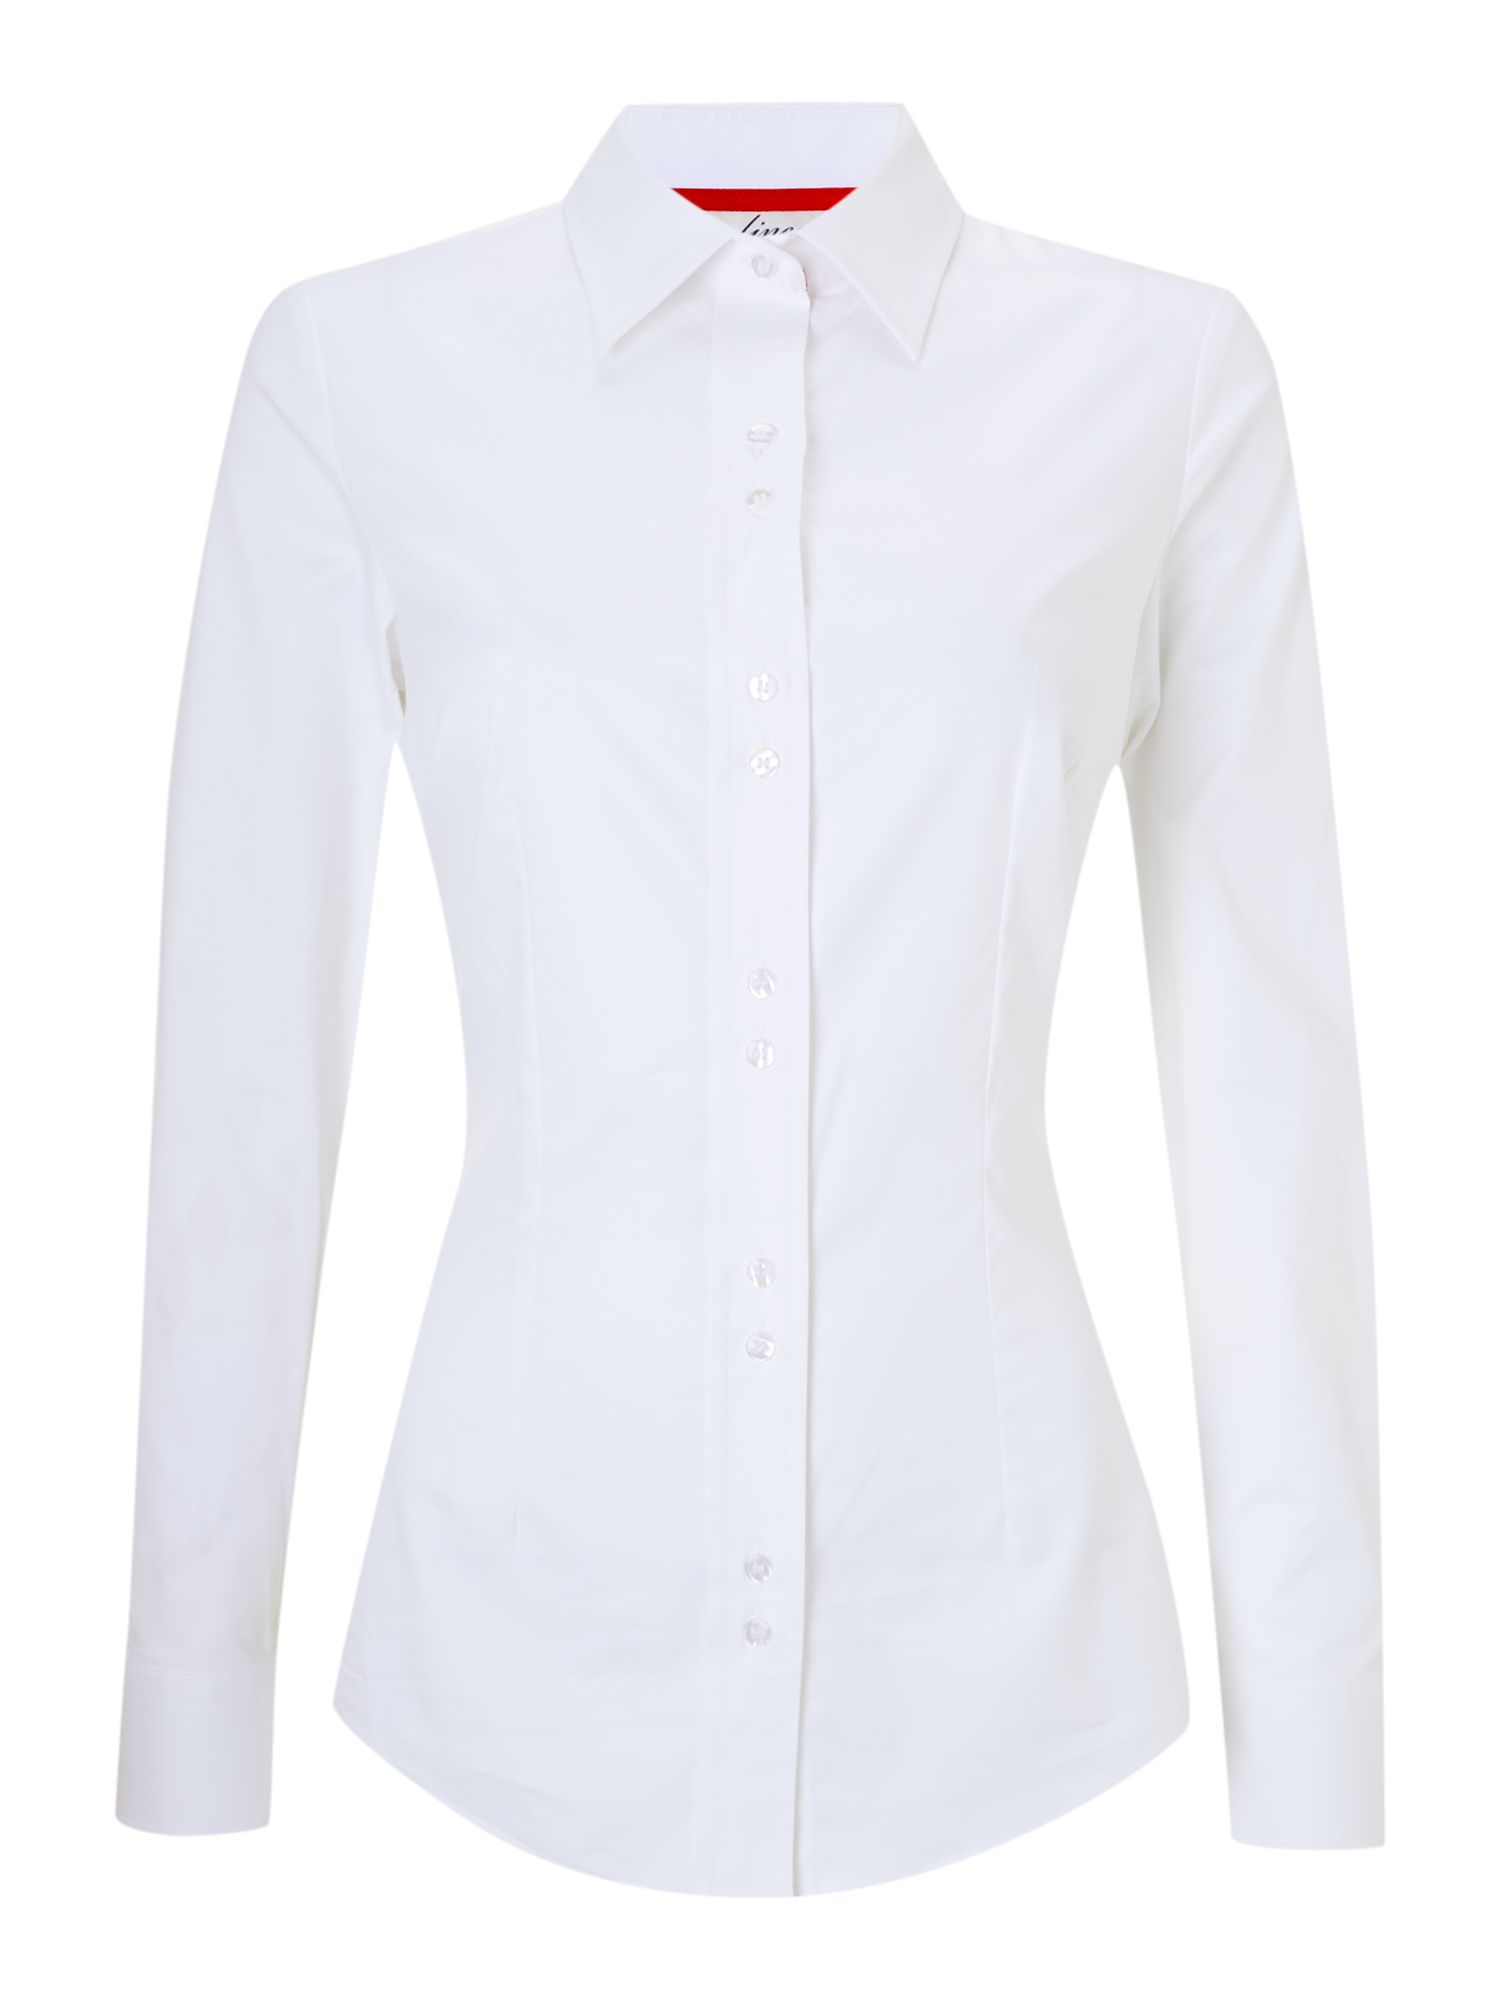 Linea Hawes and Curtis White Stretch Shirt in White | Lyst